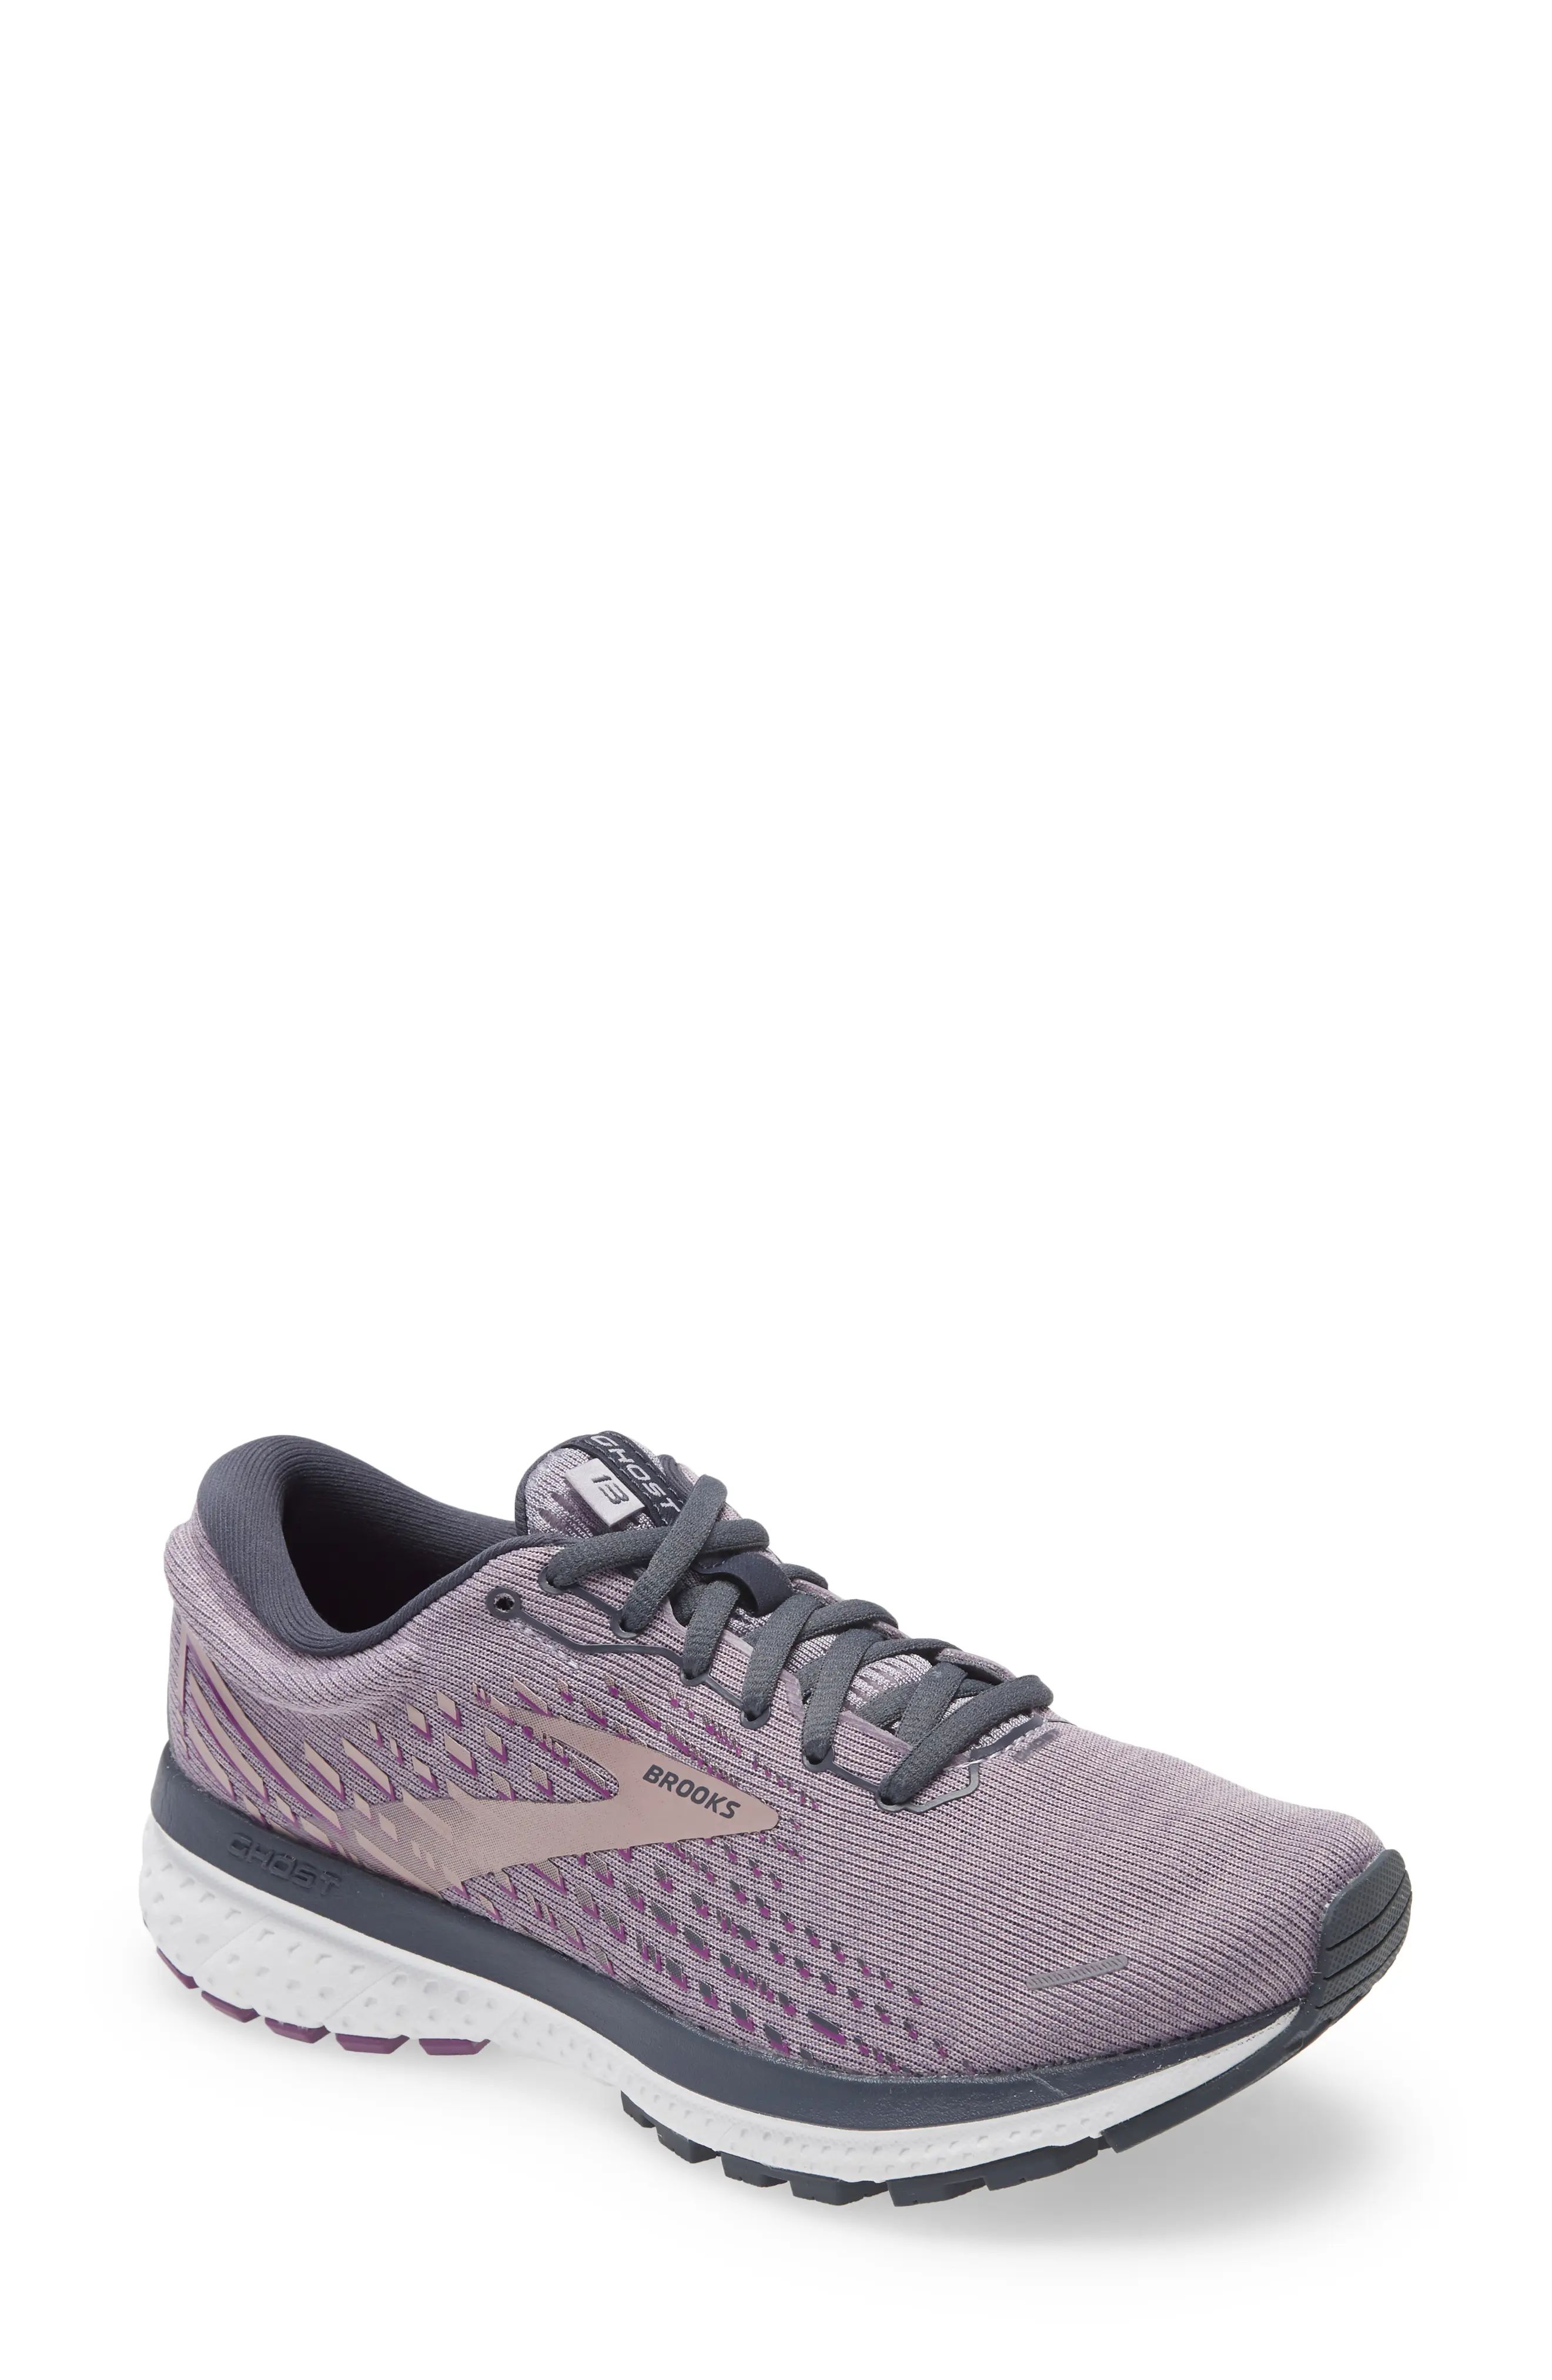 Brooks Ghost 13 Running Shoe in Lavender/Ombre/Metallic at Nordstrom, Size 11 | Nordstrom